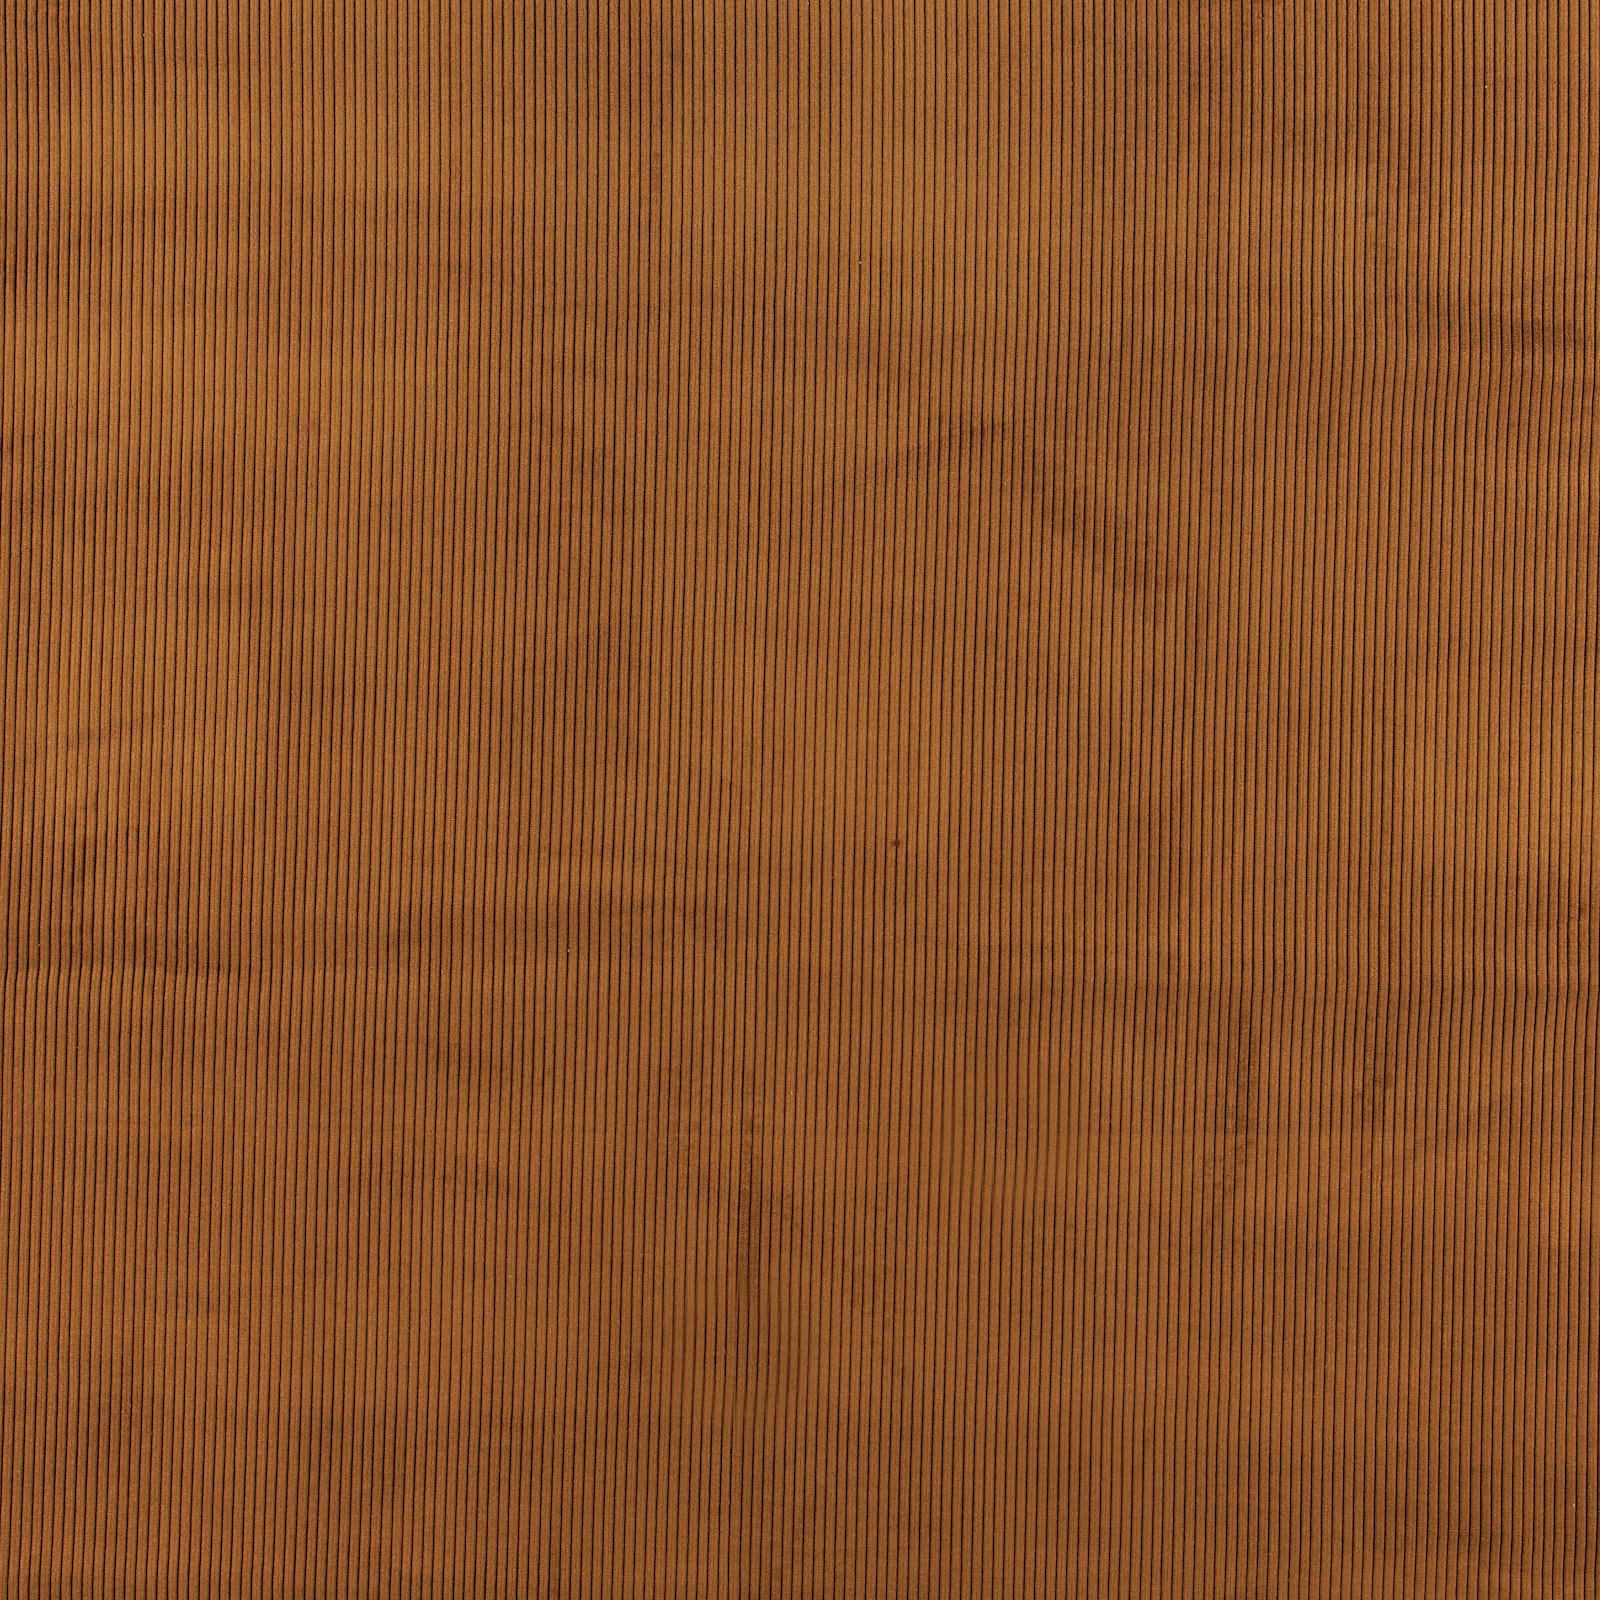 Upholstery corduroy 6 wales golden brown 823768_pack_solid